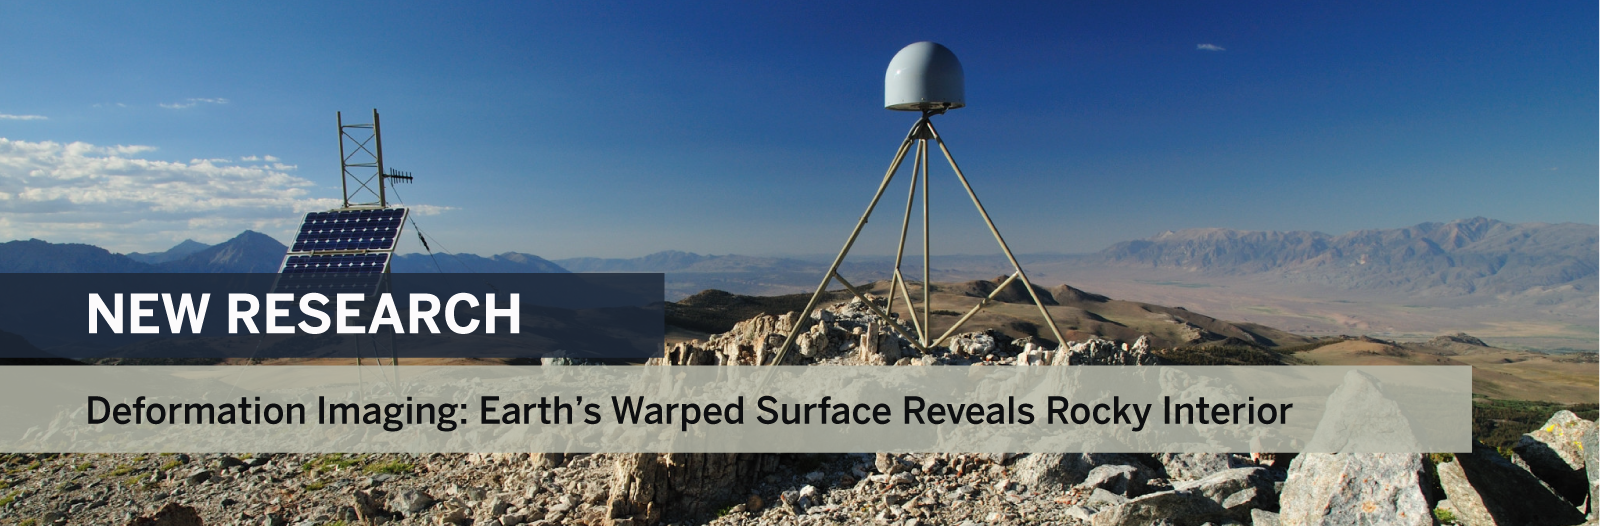 New Imaging Technique Uses Earth’s Warped Surface To Reveal Rocky Interior – Banner